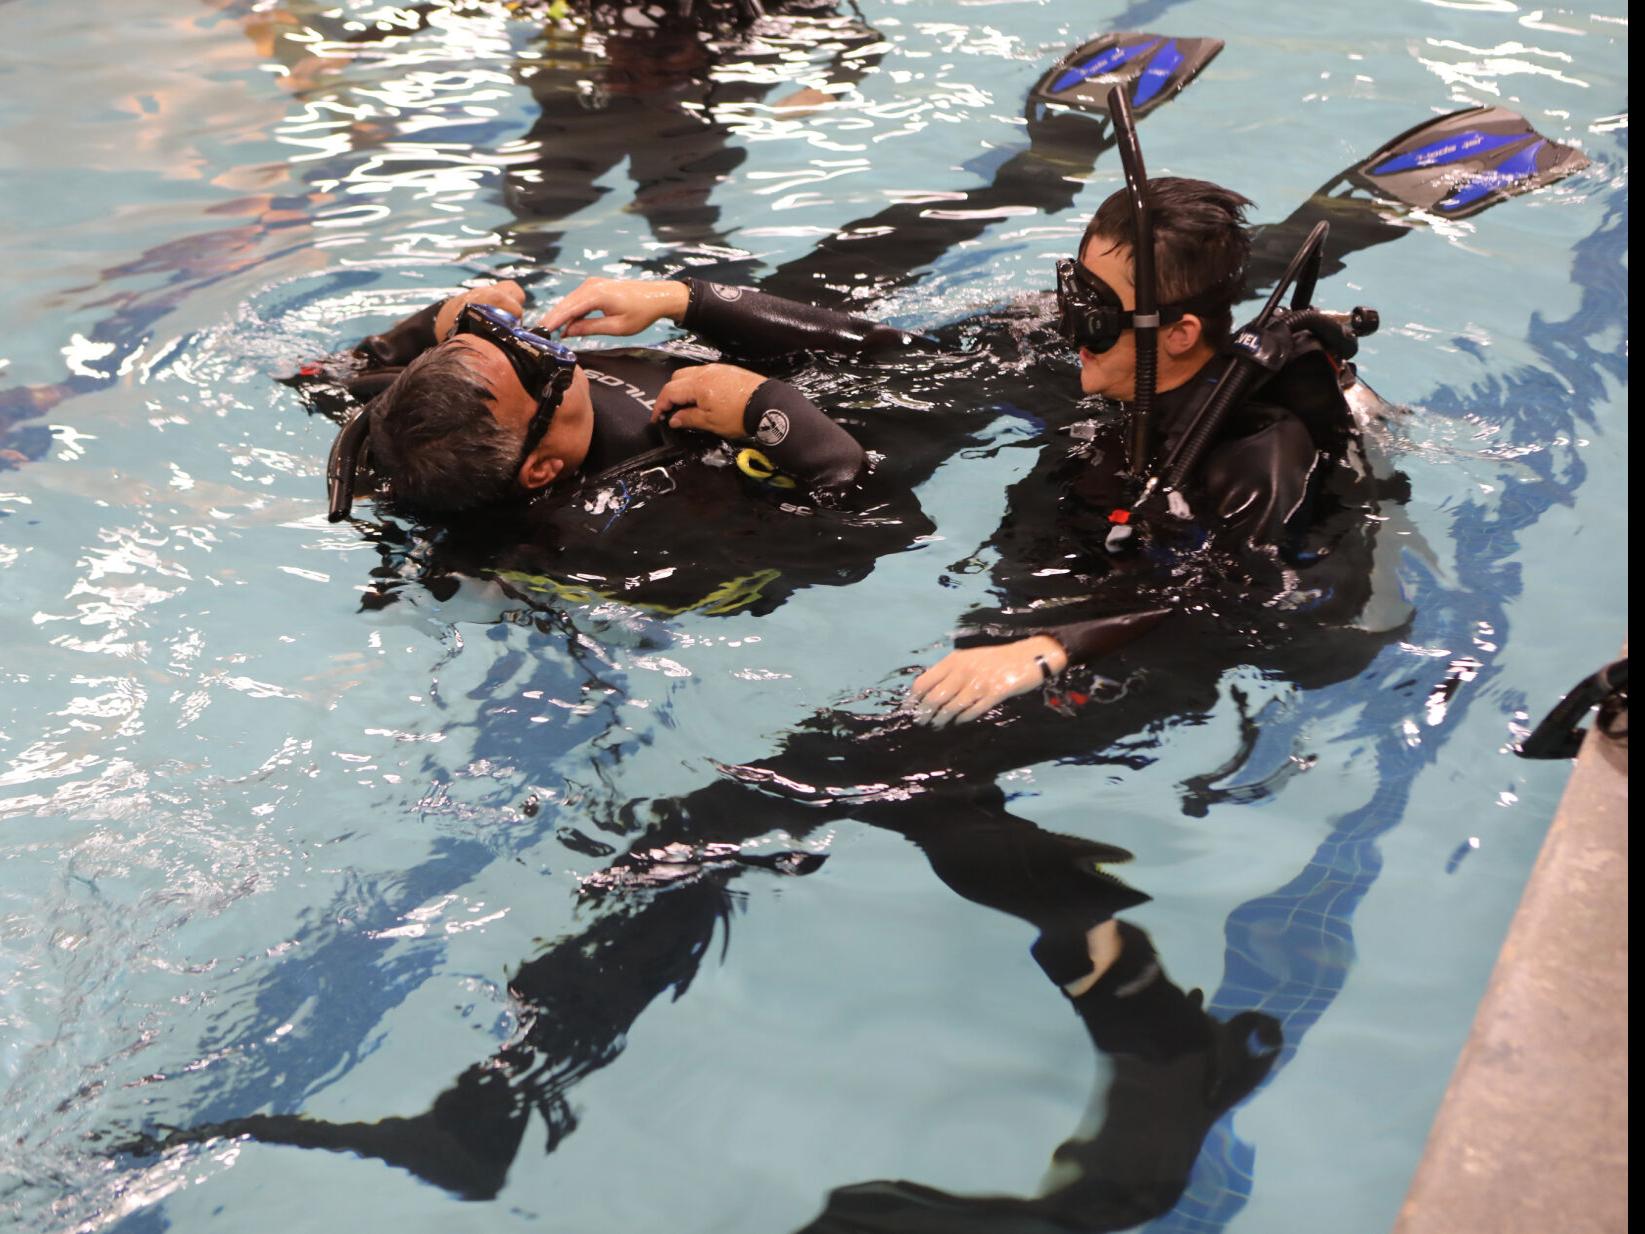 Healing Through Scuba Diving Yes Say Local Volunteers Who Teach Diving To Disabled Vets News Bakersfield Com